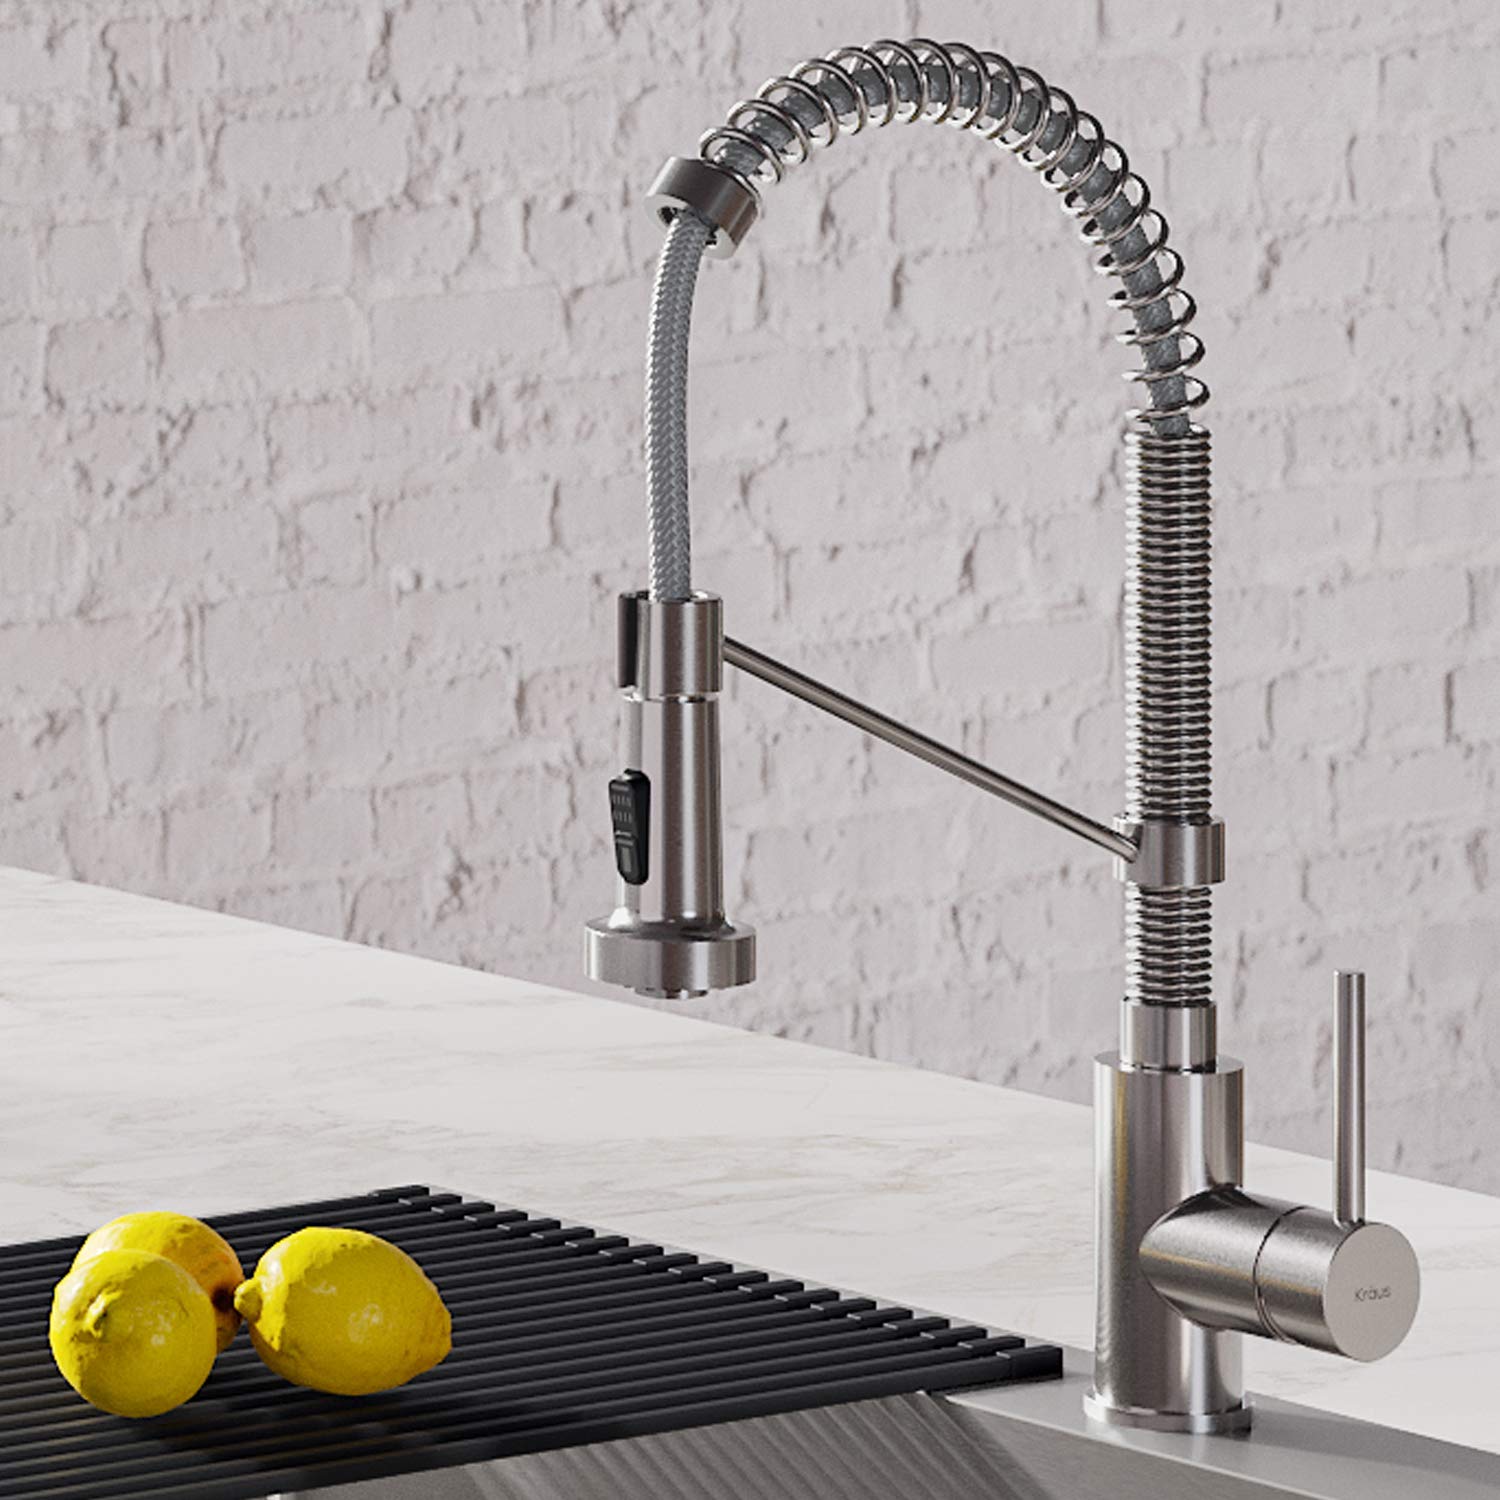 The 10 Best Kitchen Faucets (Reviewed & Compared in 2022)